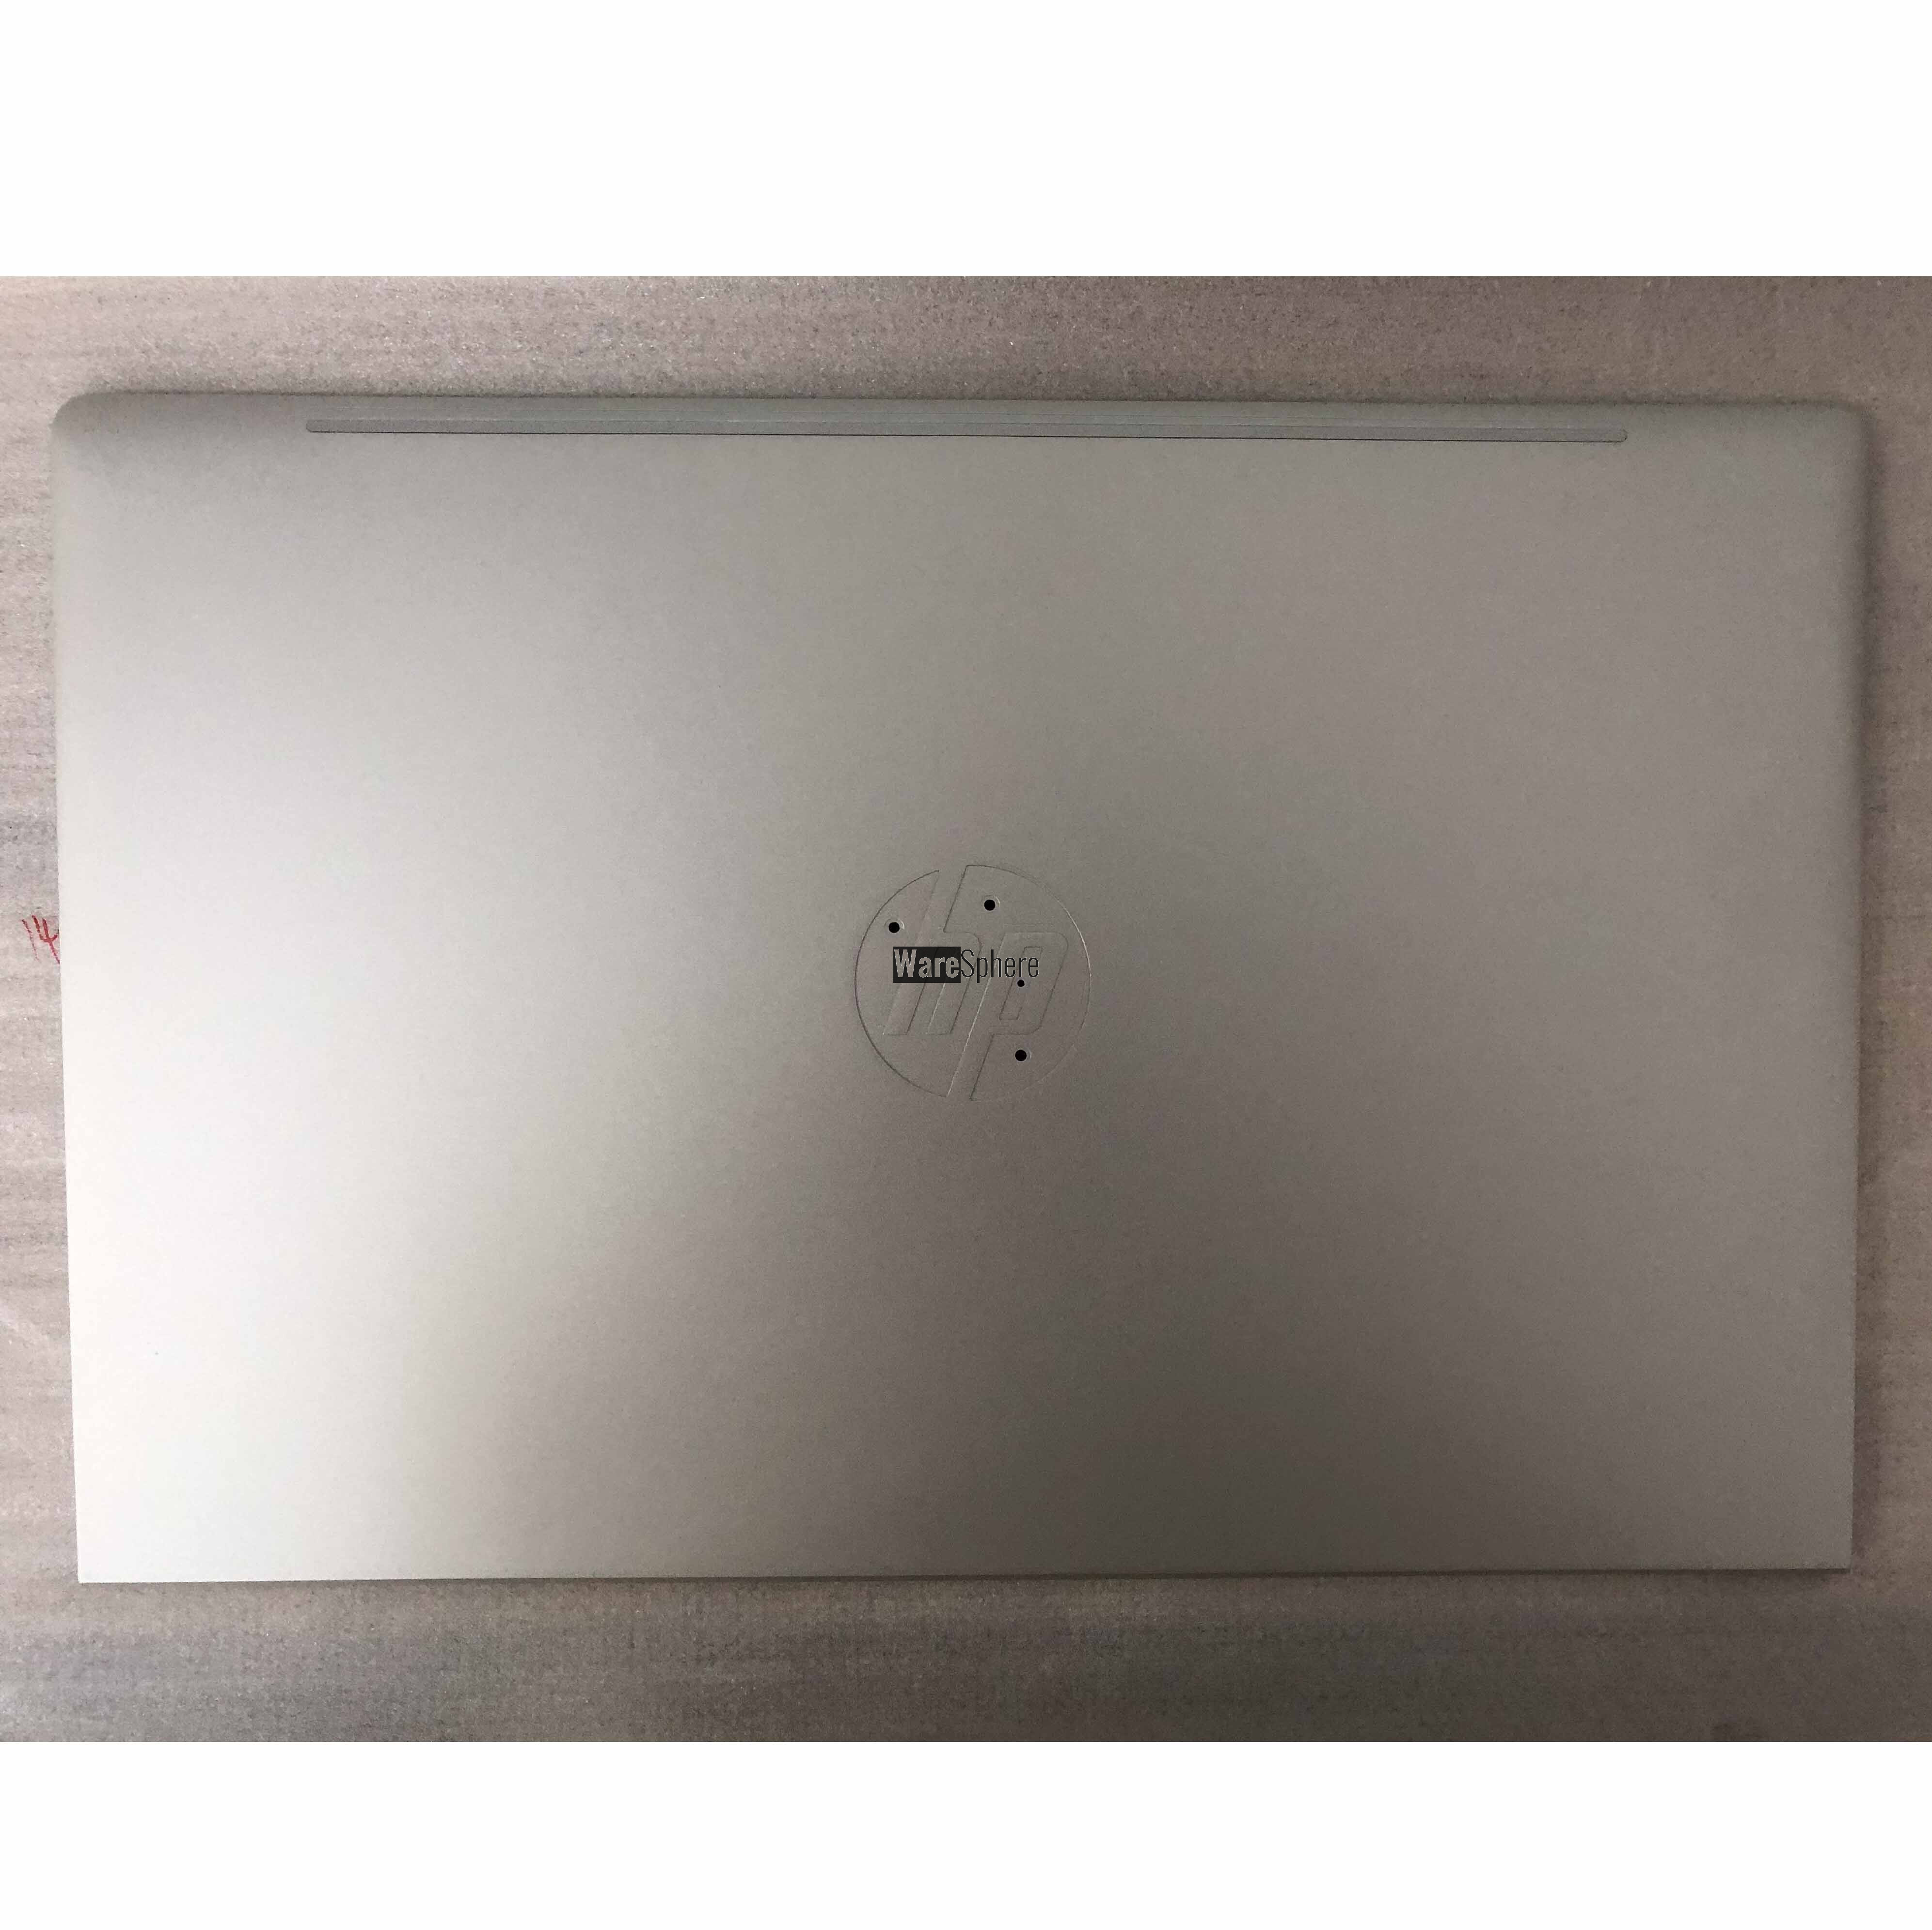 LCD Back Cover for HP Probook 14 440 G8 52X8QLCTP20 Silver